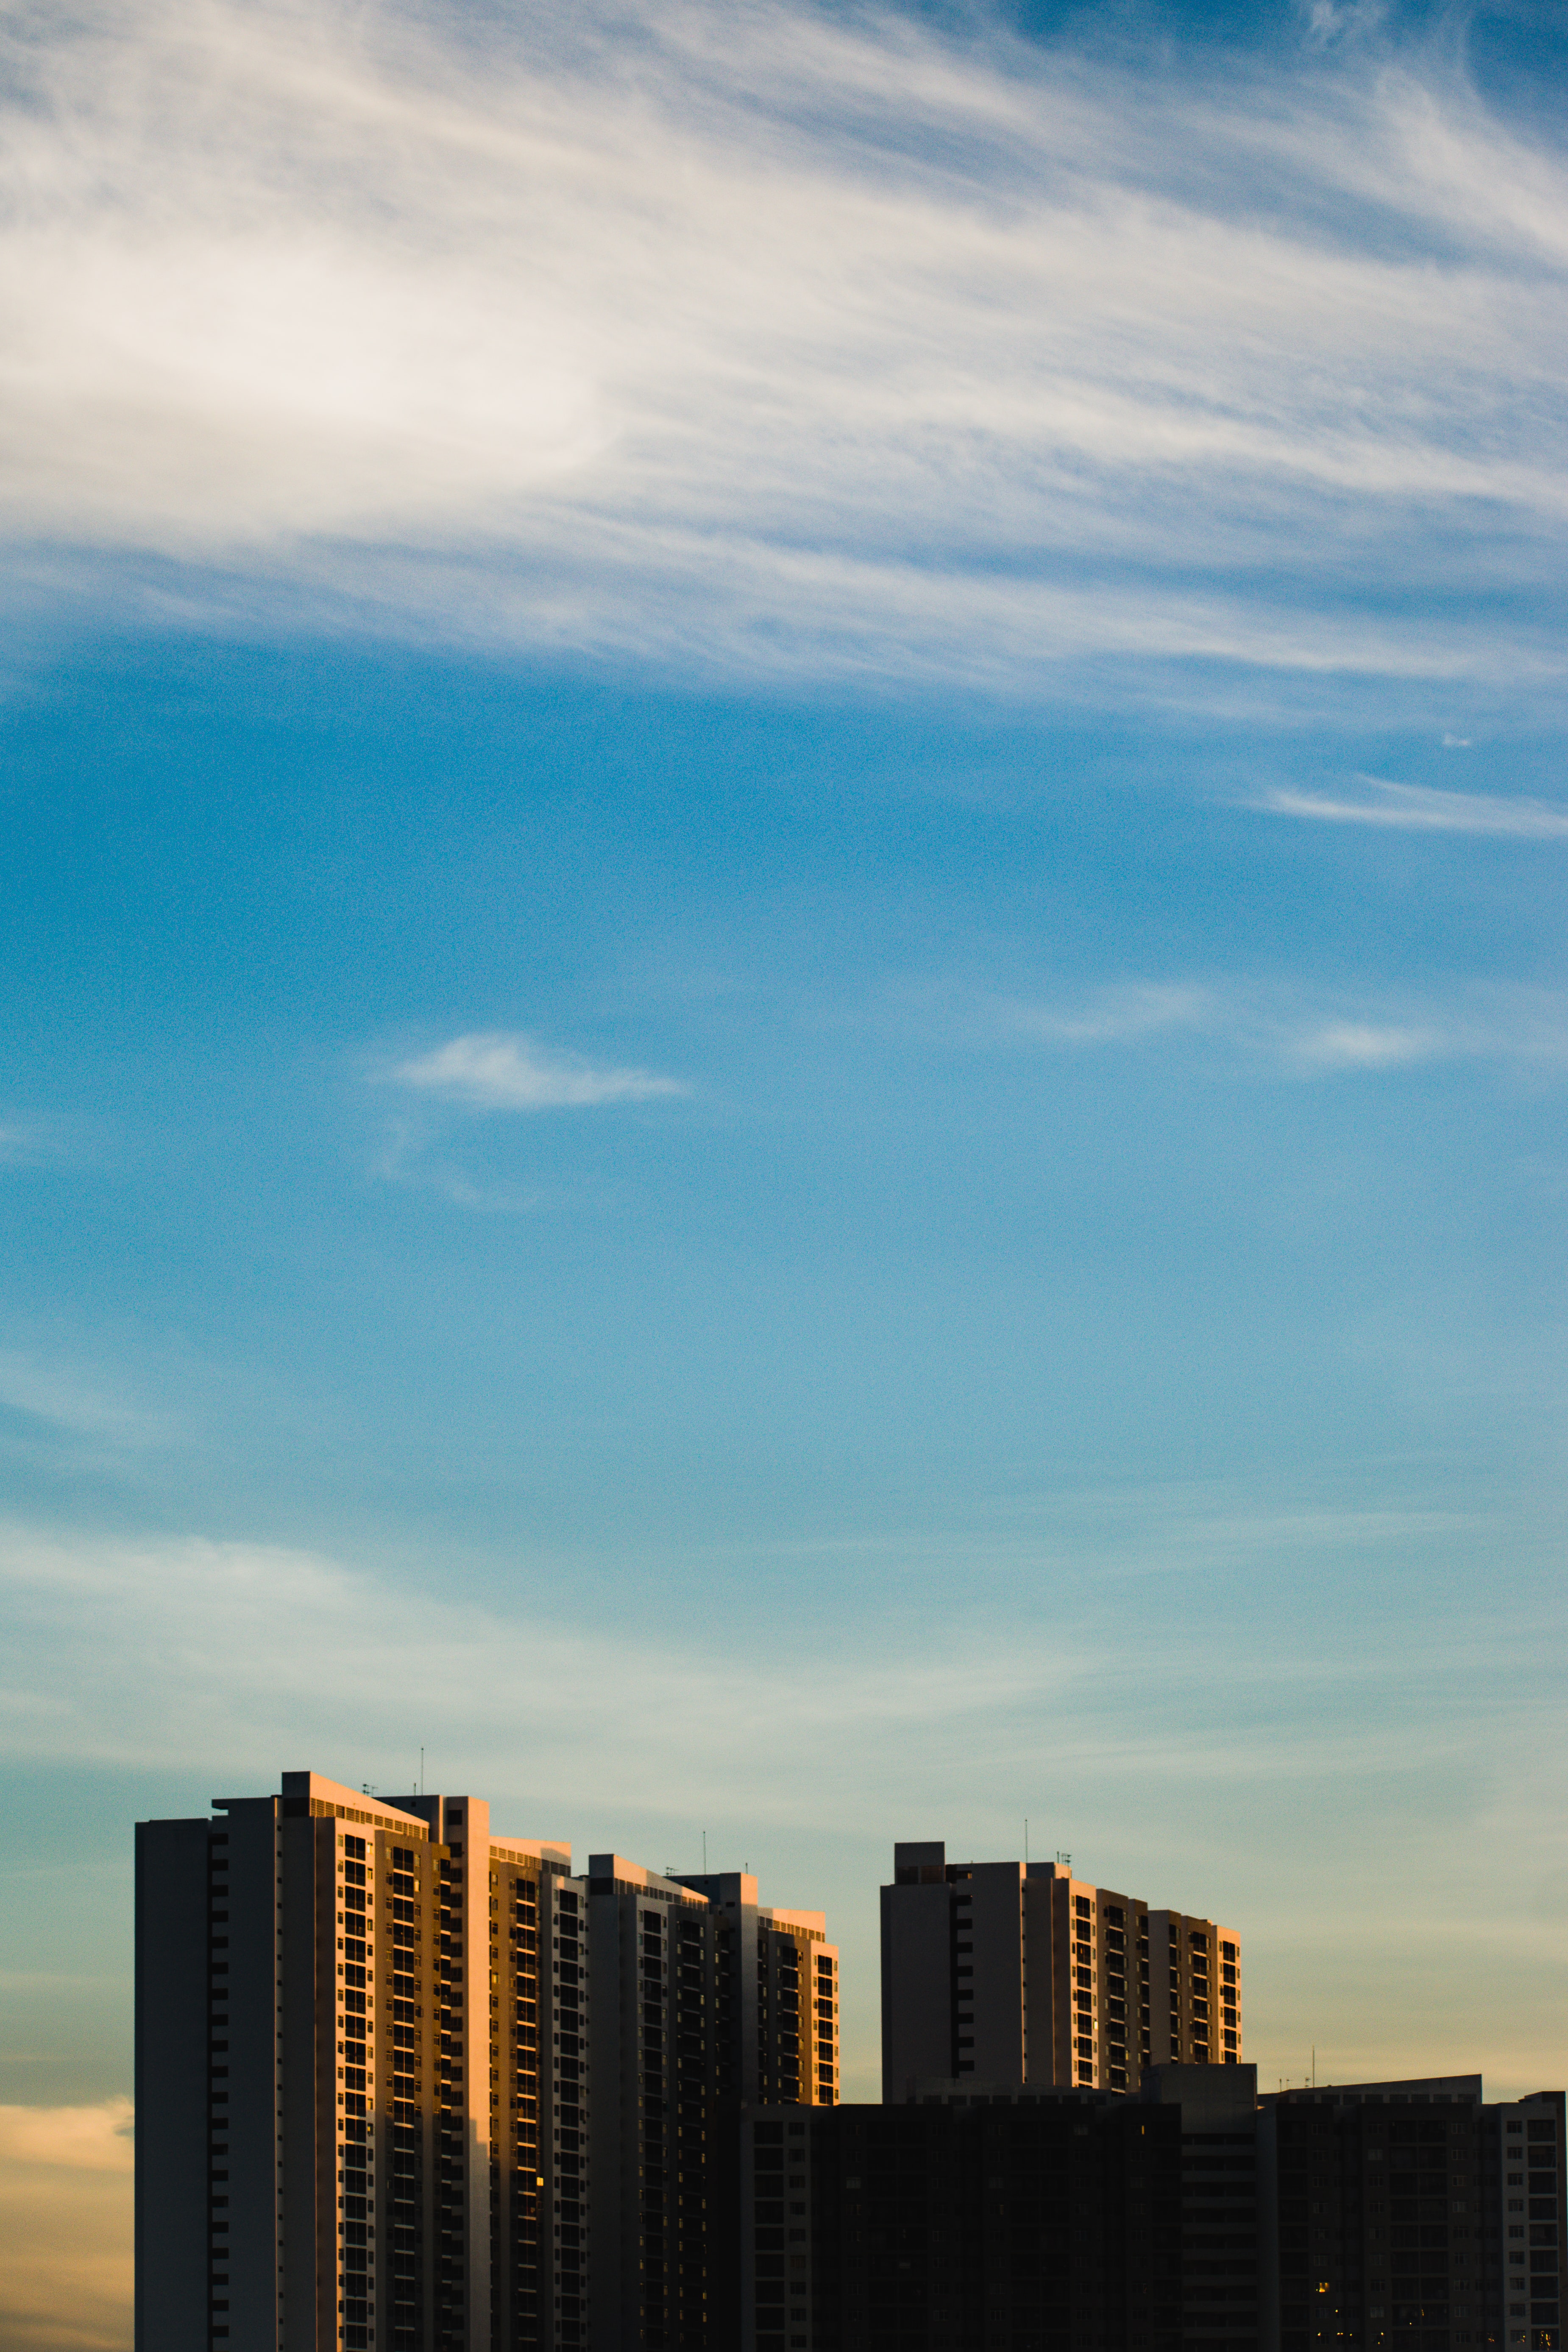 apartment, architecture, cities, sunset, sky, building, flat